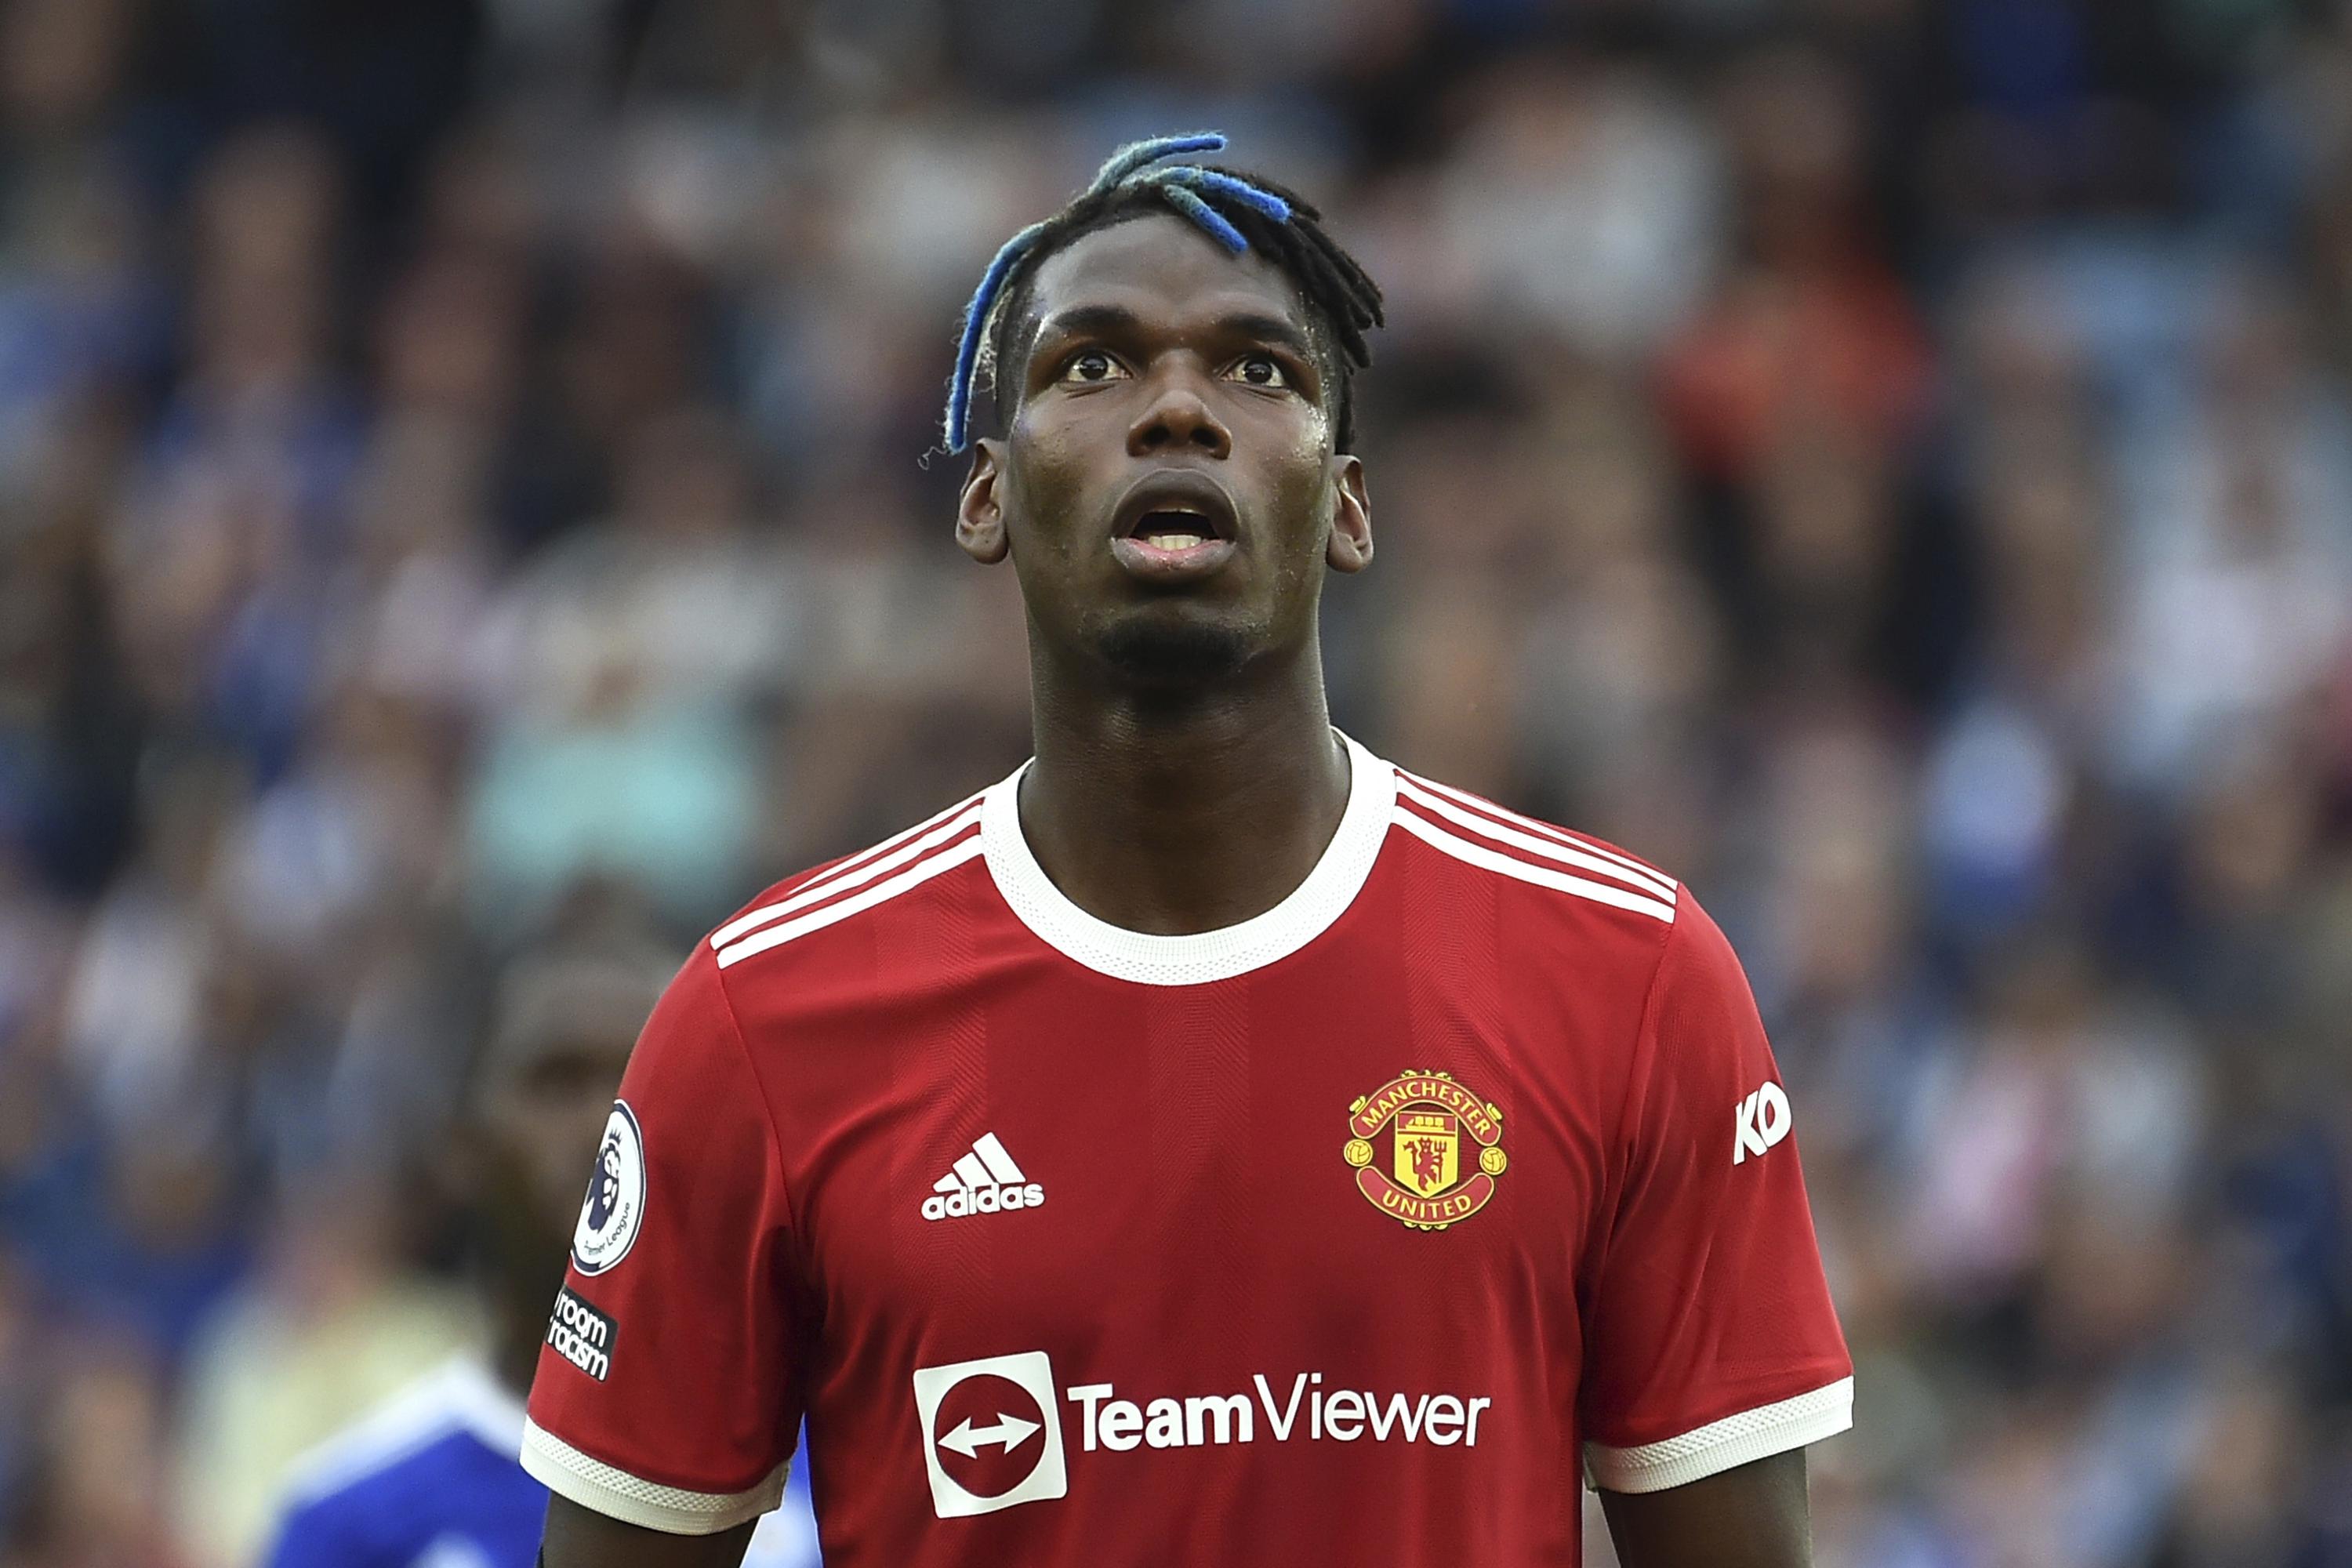 Pogba having knee surgery; World Cup status at risk